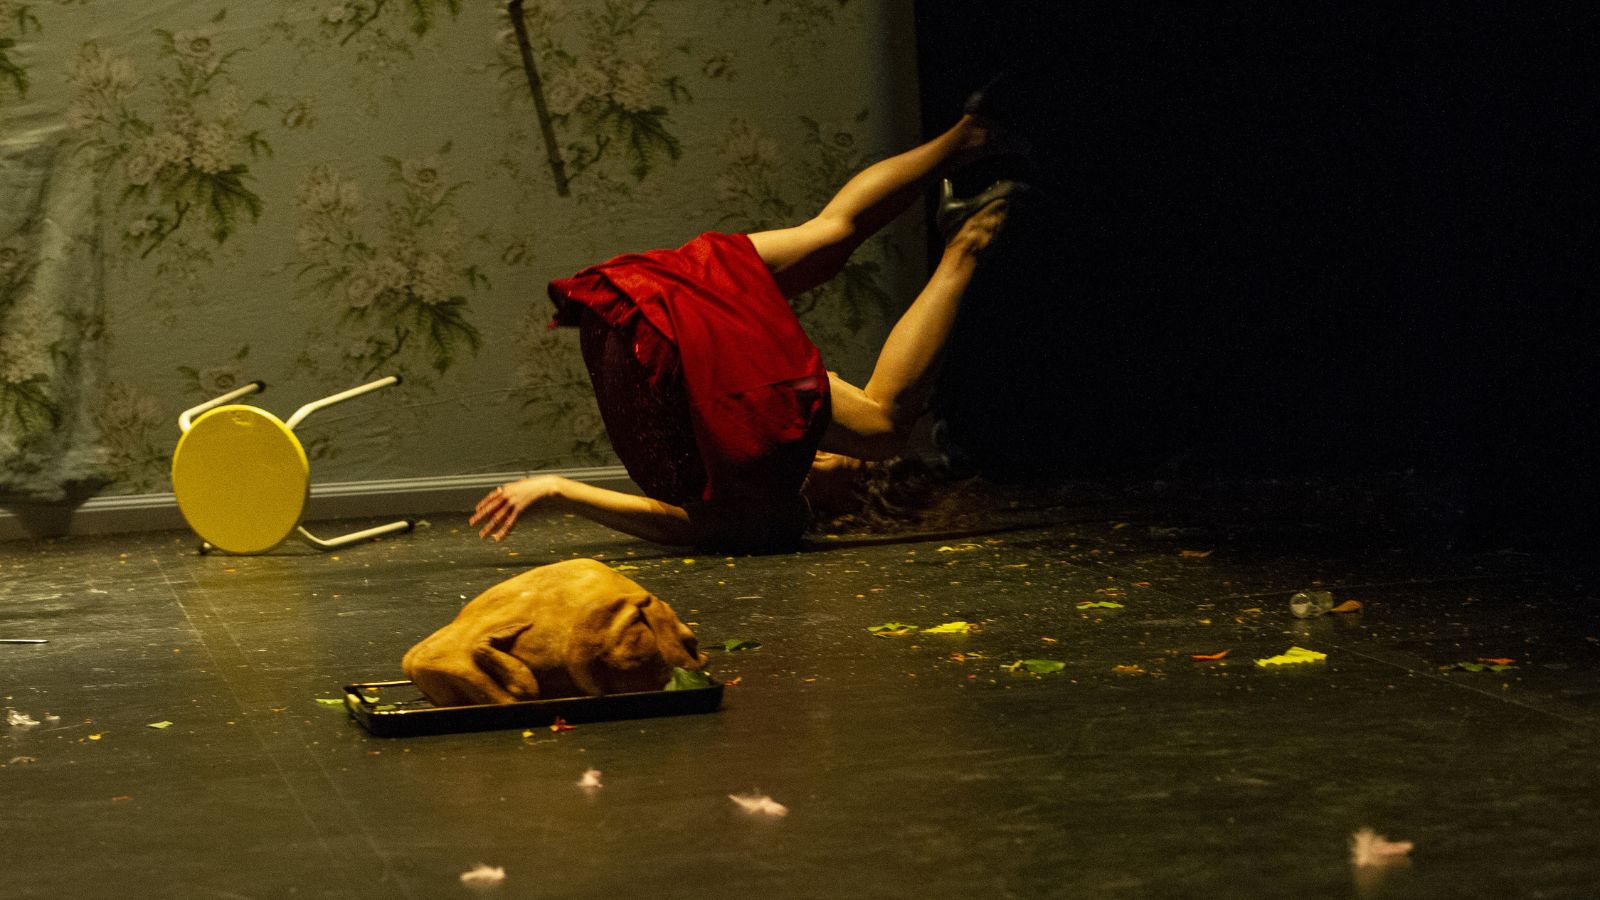 A chaotic scene with a lady blown upside down by strong winds. She wears a red dress with her legs in the air. Debris in scattered all around her.